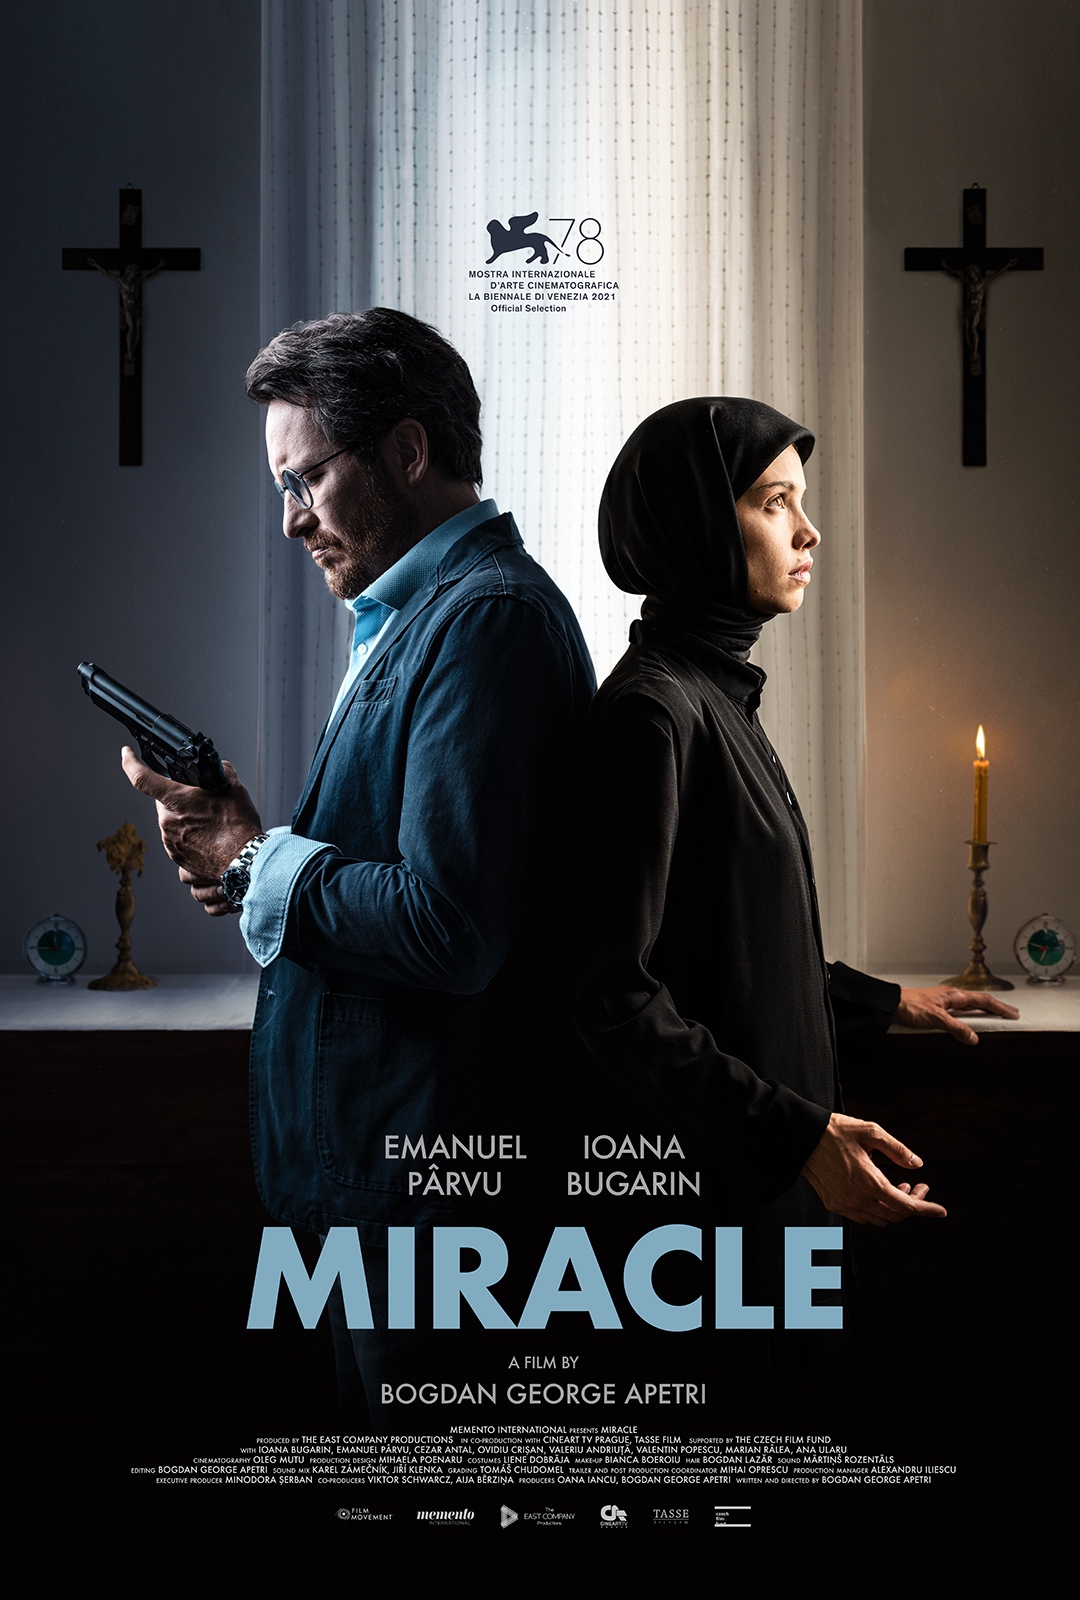 Miracle (2021) Movie Review from Eye for Film